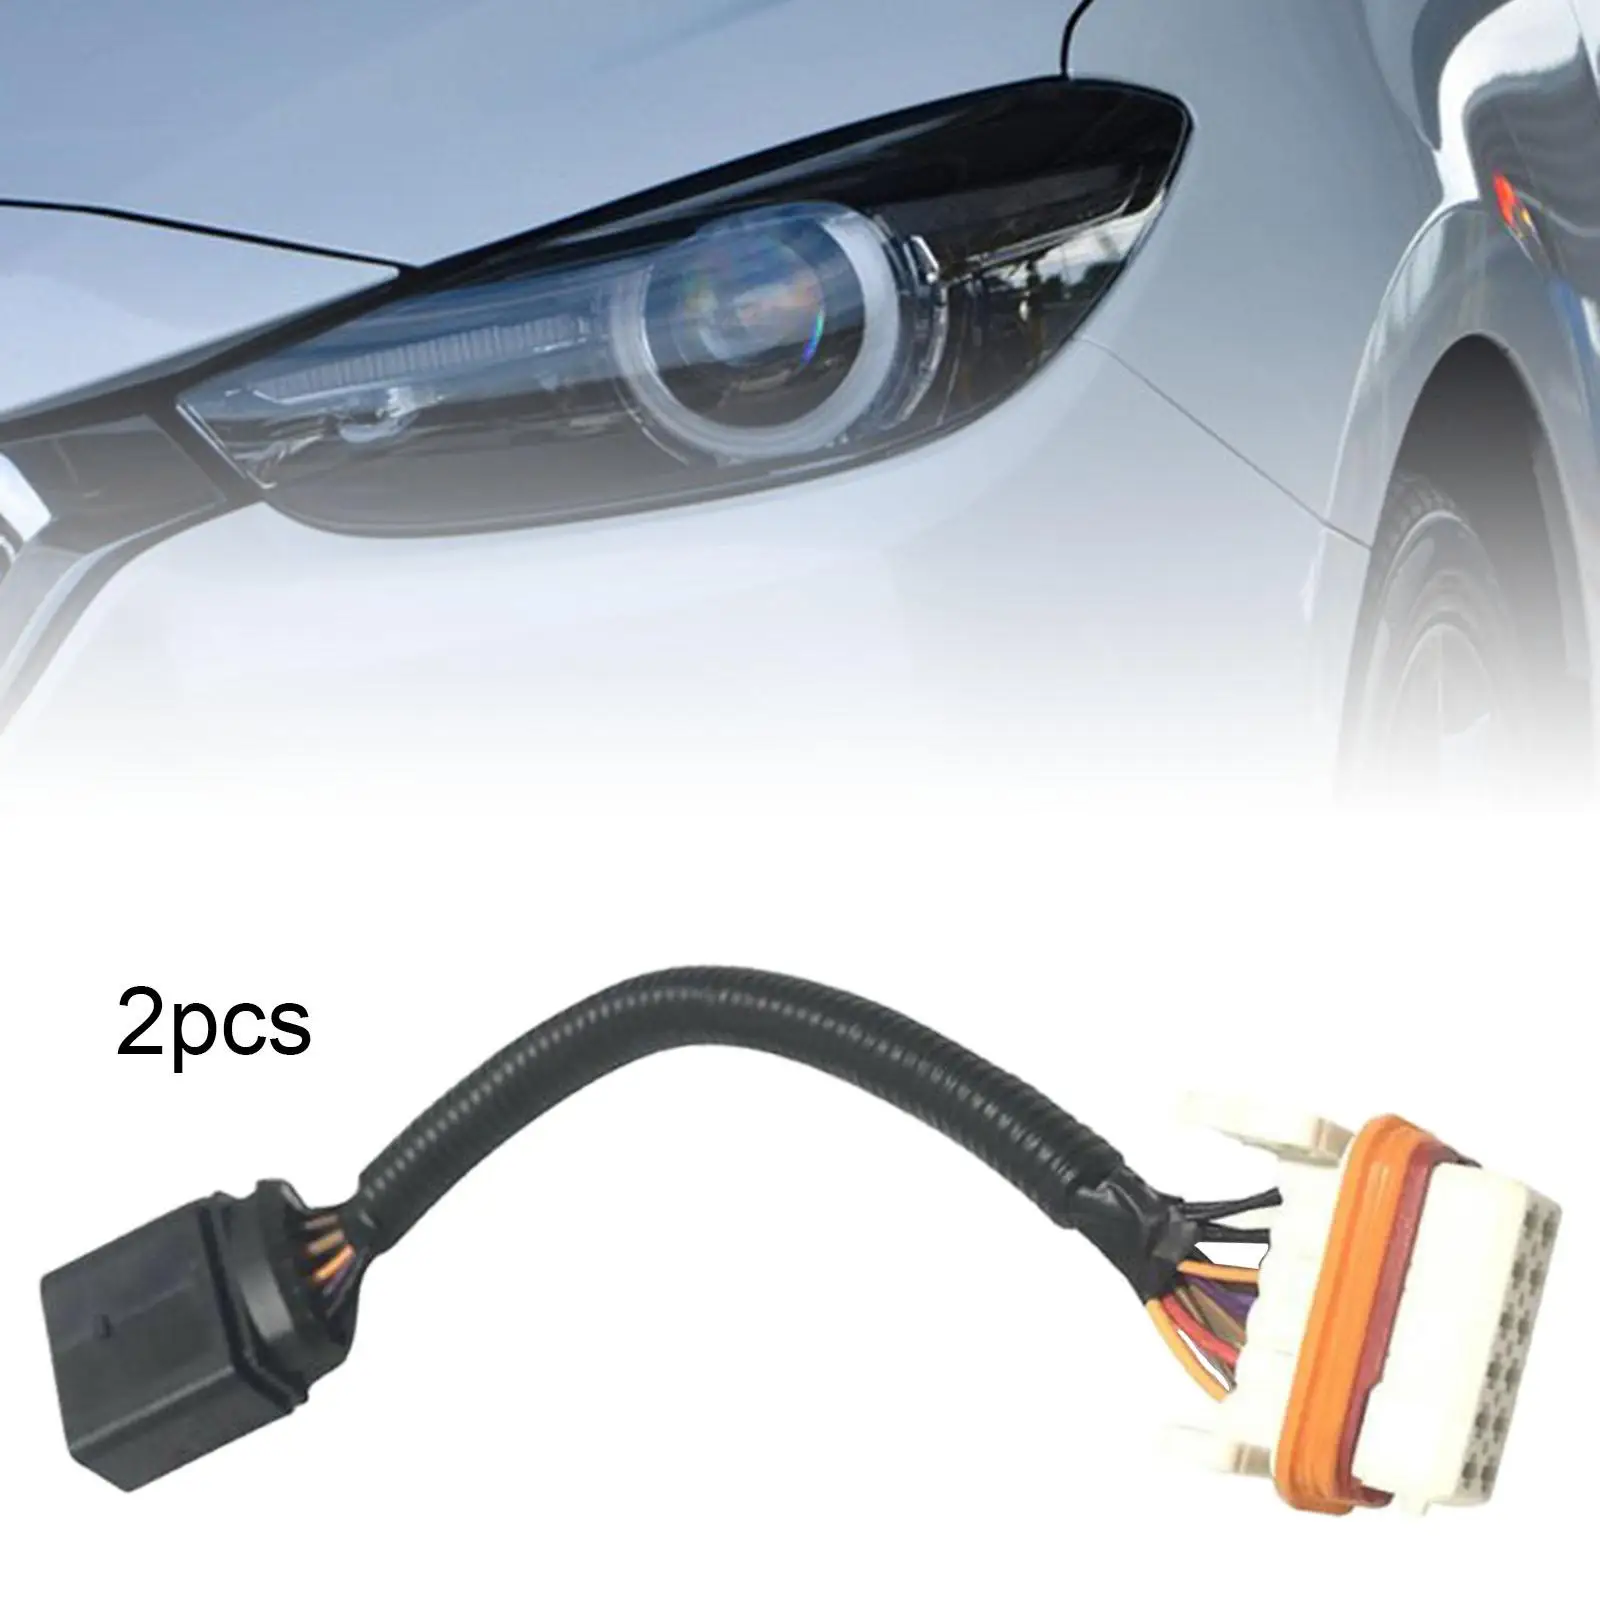 Headlight Wiring Harness Adapter, 7L6971071A  Right Lighting Parts Spare Parts Replaces Professional Accessories  